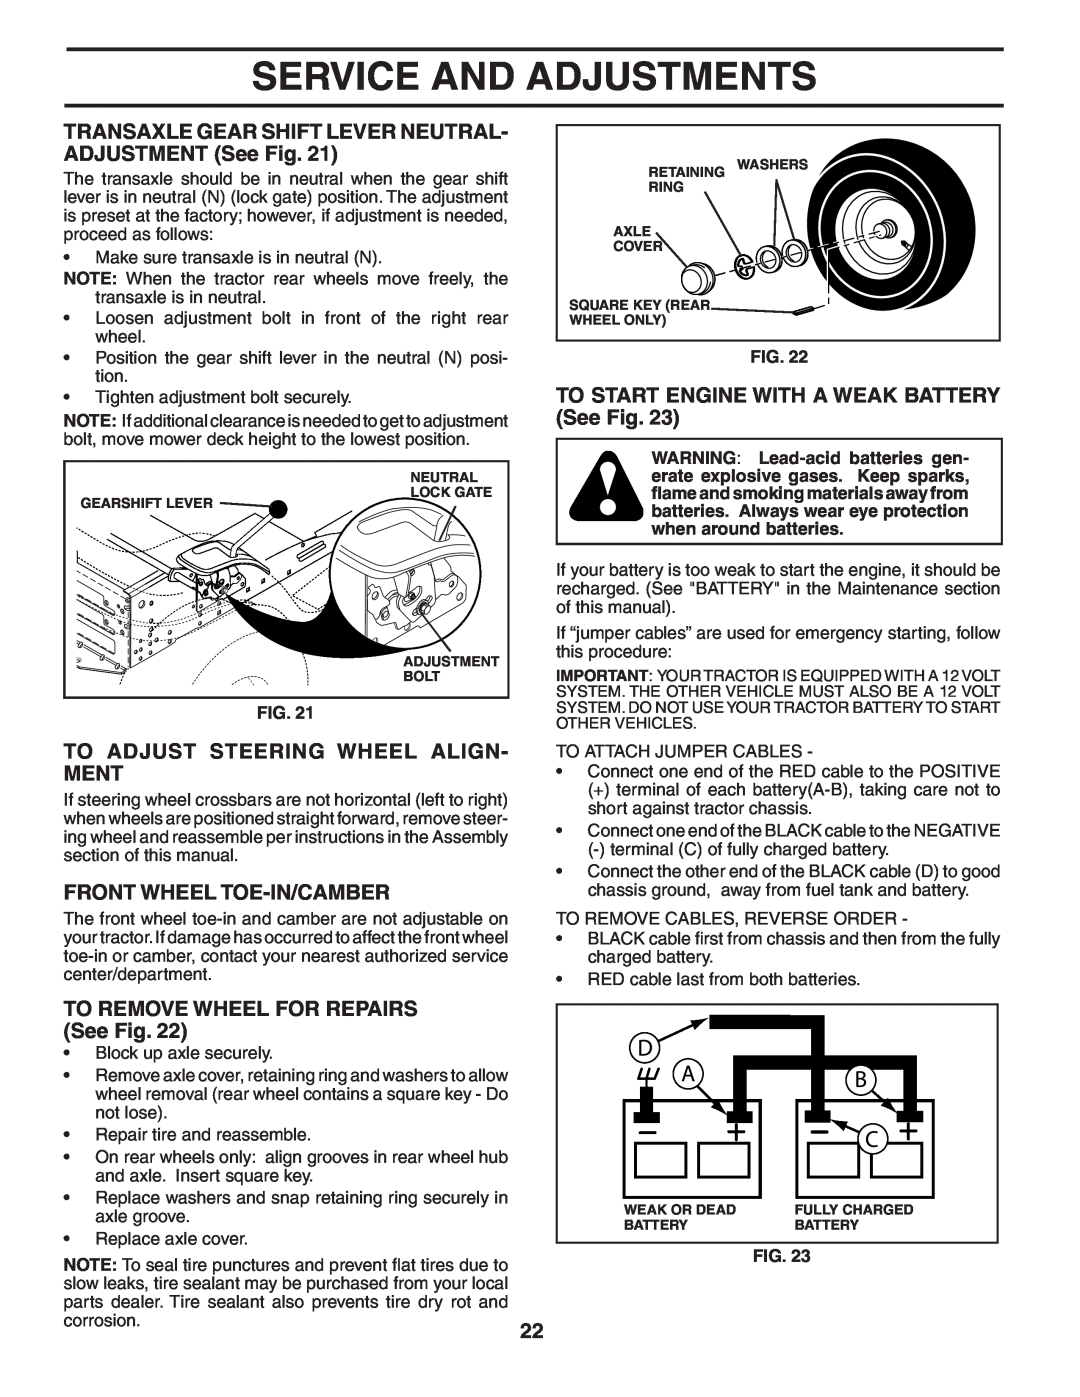 Poulan 403315 To Adjust Steering Wheel Align- Ment, Front Wheel Toe-In/Camber, TO START ENGINE WITH A WEAK BATTERY See Fig 